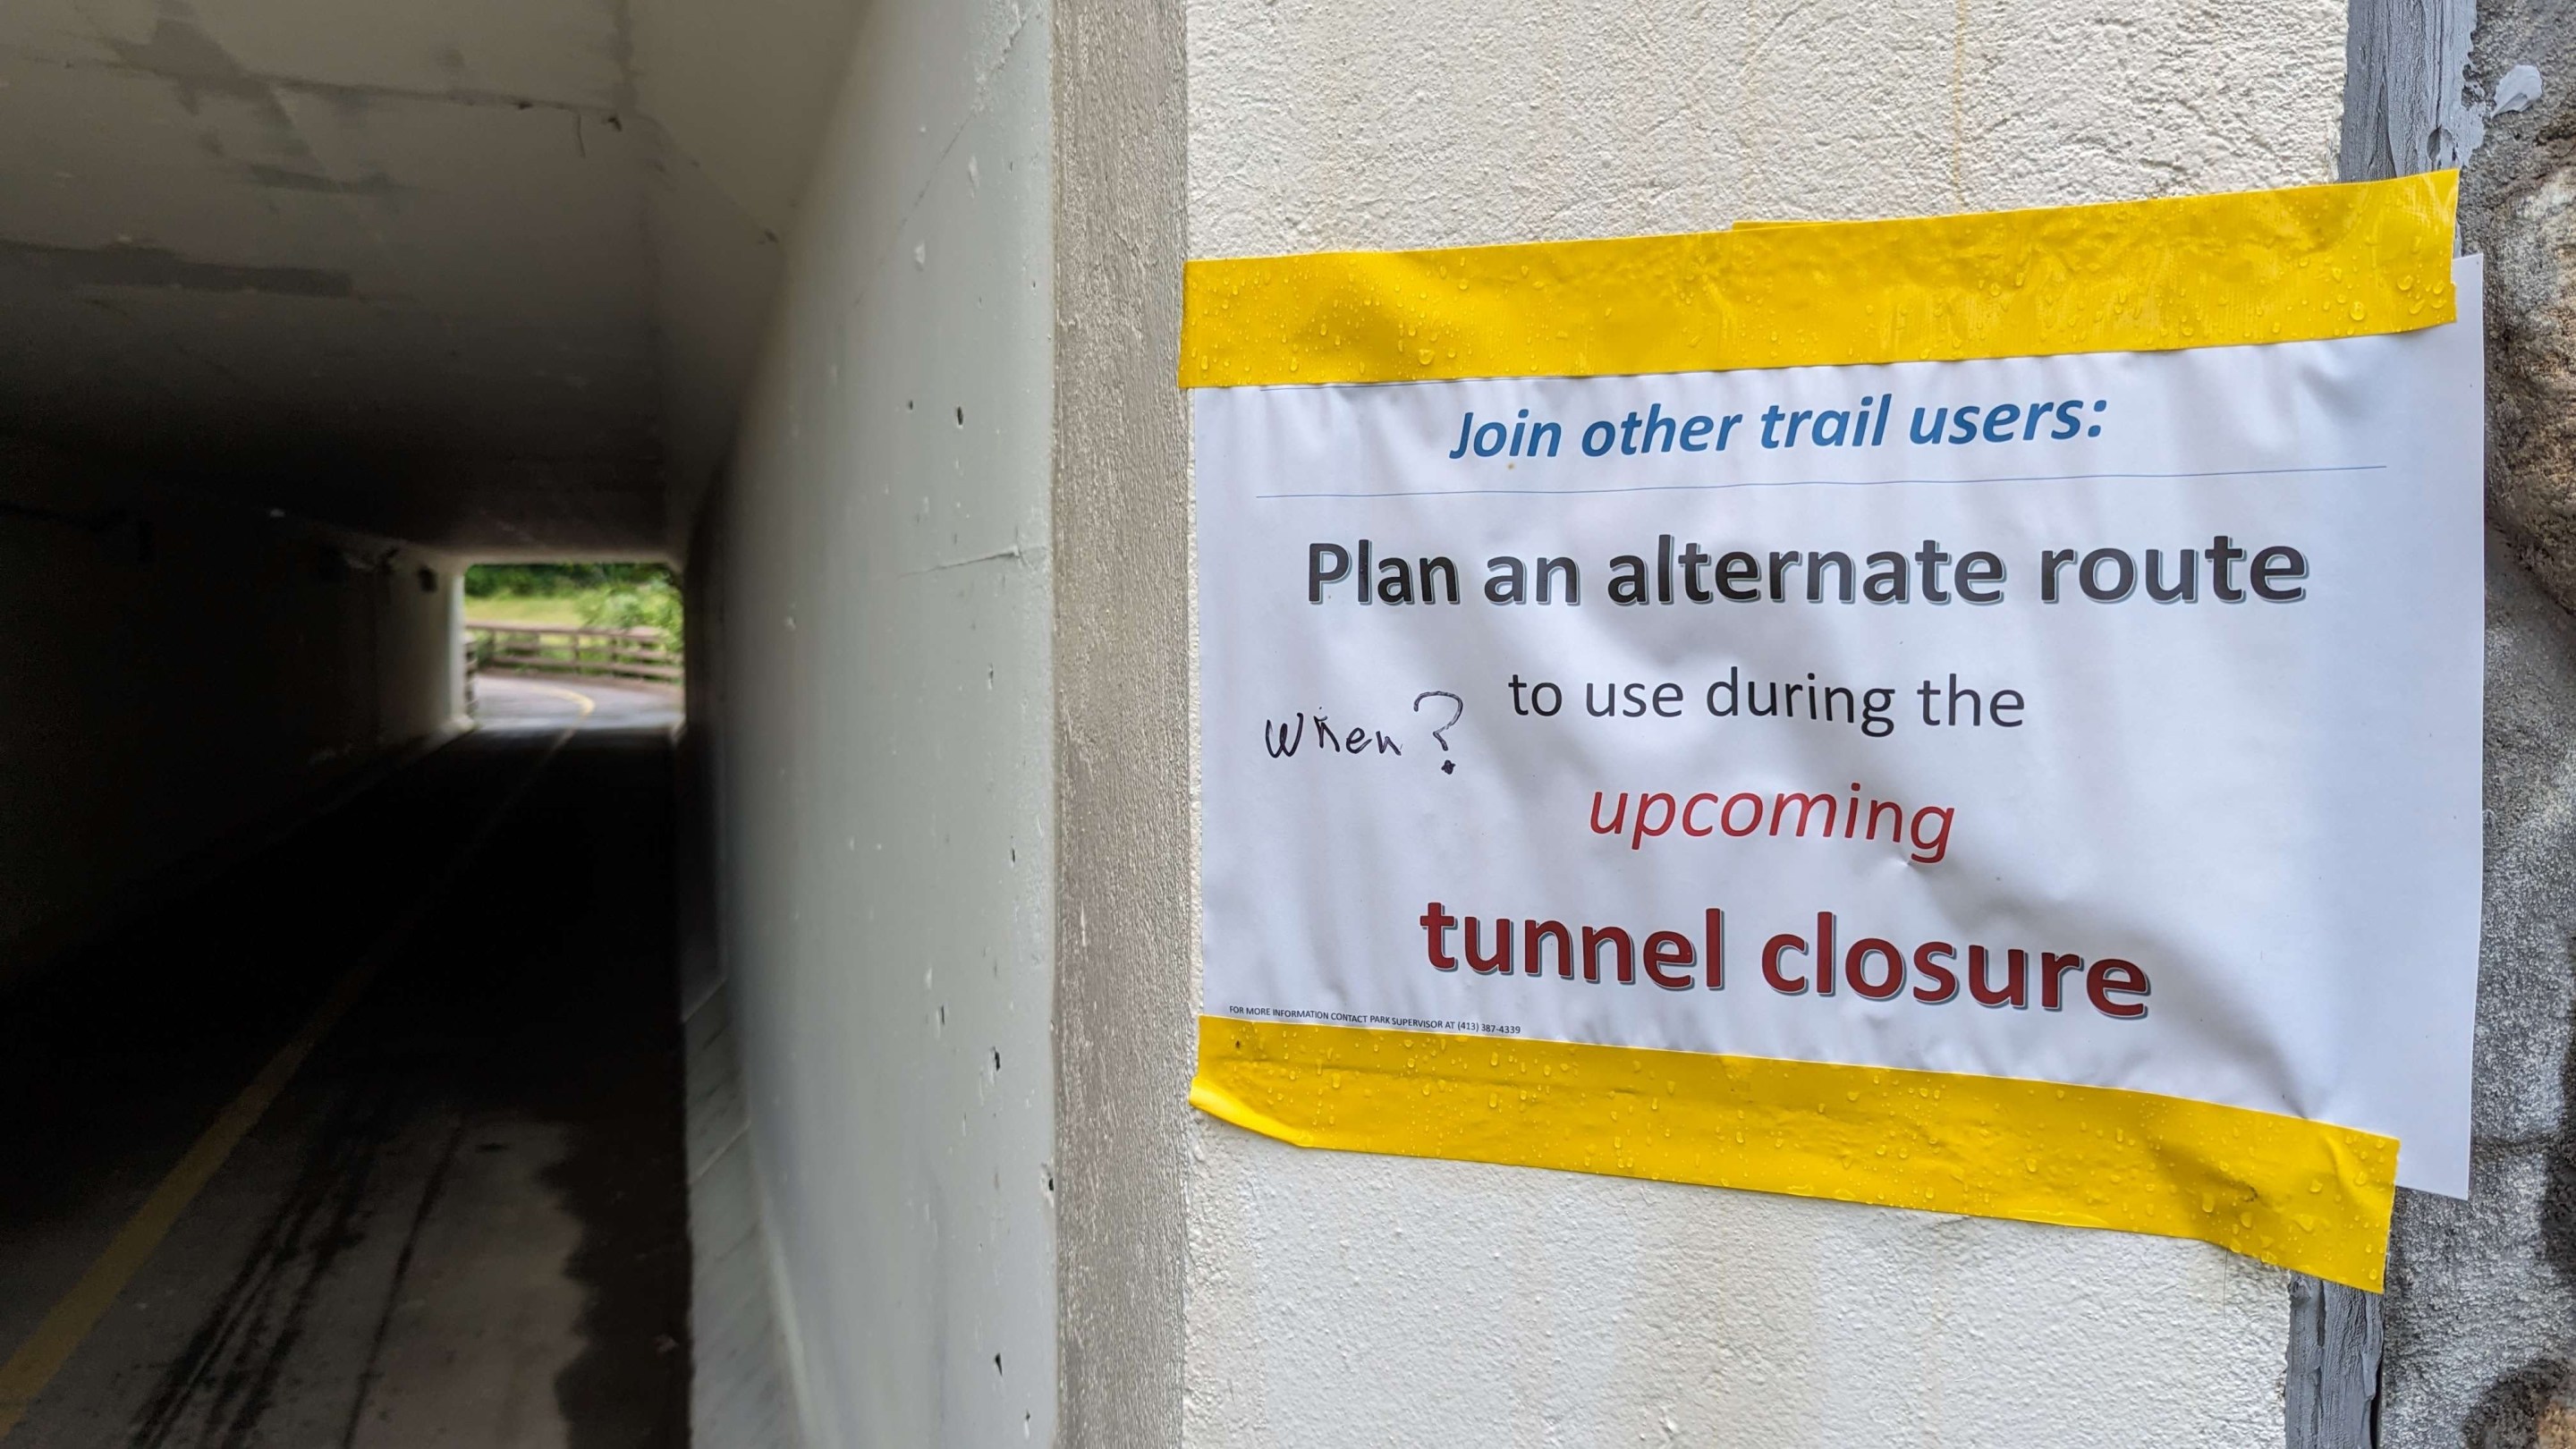 A homemade sign printed on 8.5"x11" paper is haphazardly taped to the entrance to a pedestrian tunnel. The sign uses different fonts for each line of text. The top line reads (in blue, italicized text): "Join other trail users:" the next line, in black, larger text: "Plan an alternate route", the next line, smaller black text: "to use during the" (in red, larger italicized text) "upcoming" (final line, red bolder text) "tunnel closure". On the left side of the paper, someone has hand-written the word "When?" with a black marker. Fine print at the bottom of the sign says "FOR MORE INFORMATION CONTACT PARK SUPERVISOR AT (413) 387-4339."